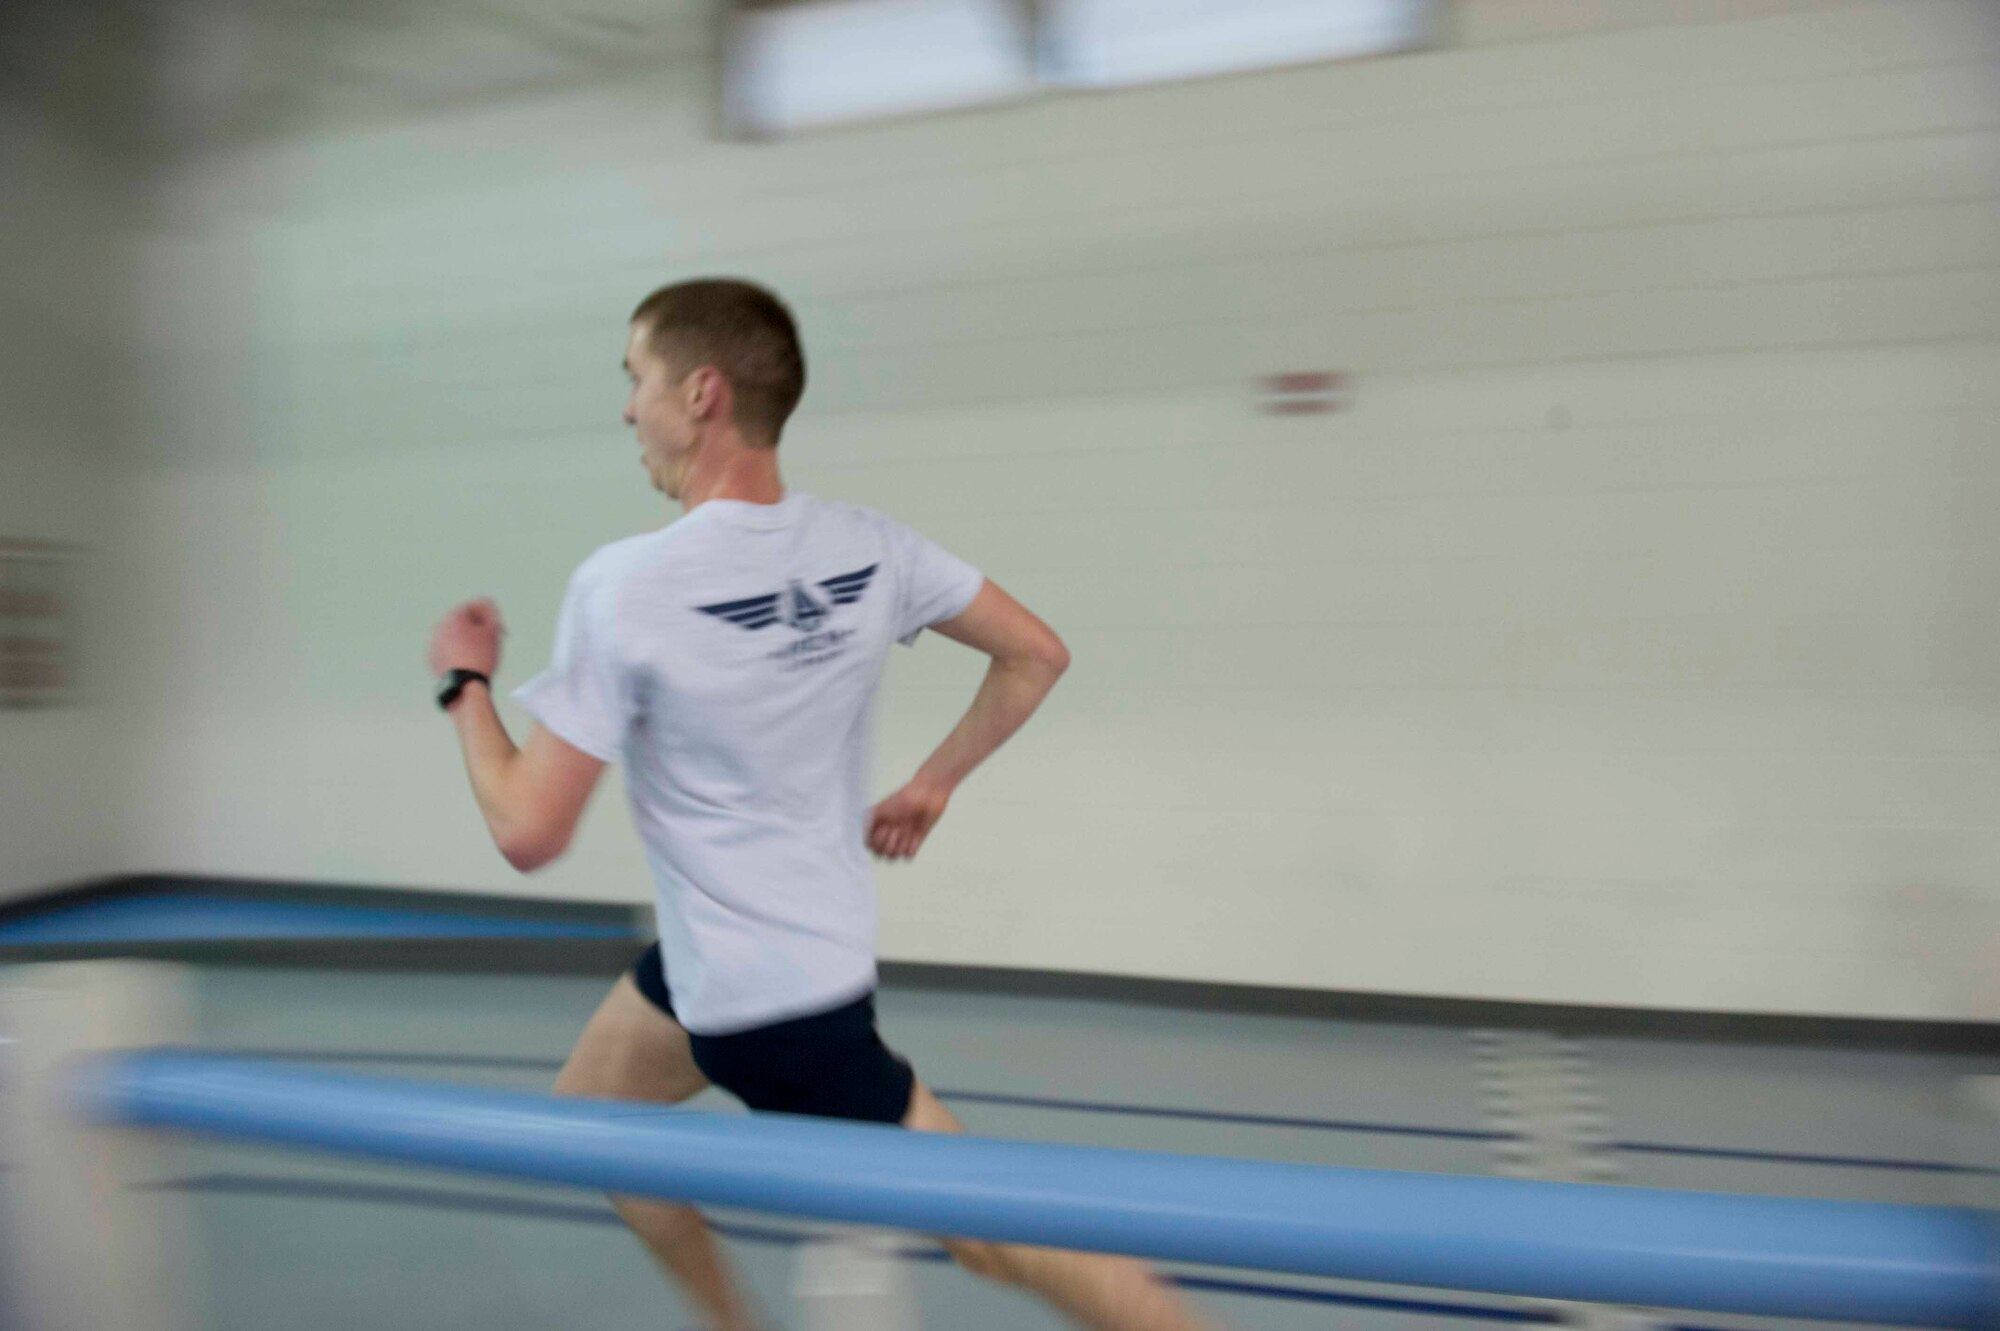 Airman 1st Class Augustin Sloan, personnelist from the 5th Force Support Squadron, sprints his last lap at the McAdoo Fitness Center on Minot Air Force Base, N.D. Feb. 11, 2015. Sloan makes time to run every day. (U.S. Air Force photo/Airman 1st Class Sahara L. Fales)